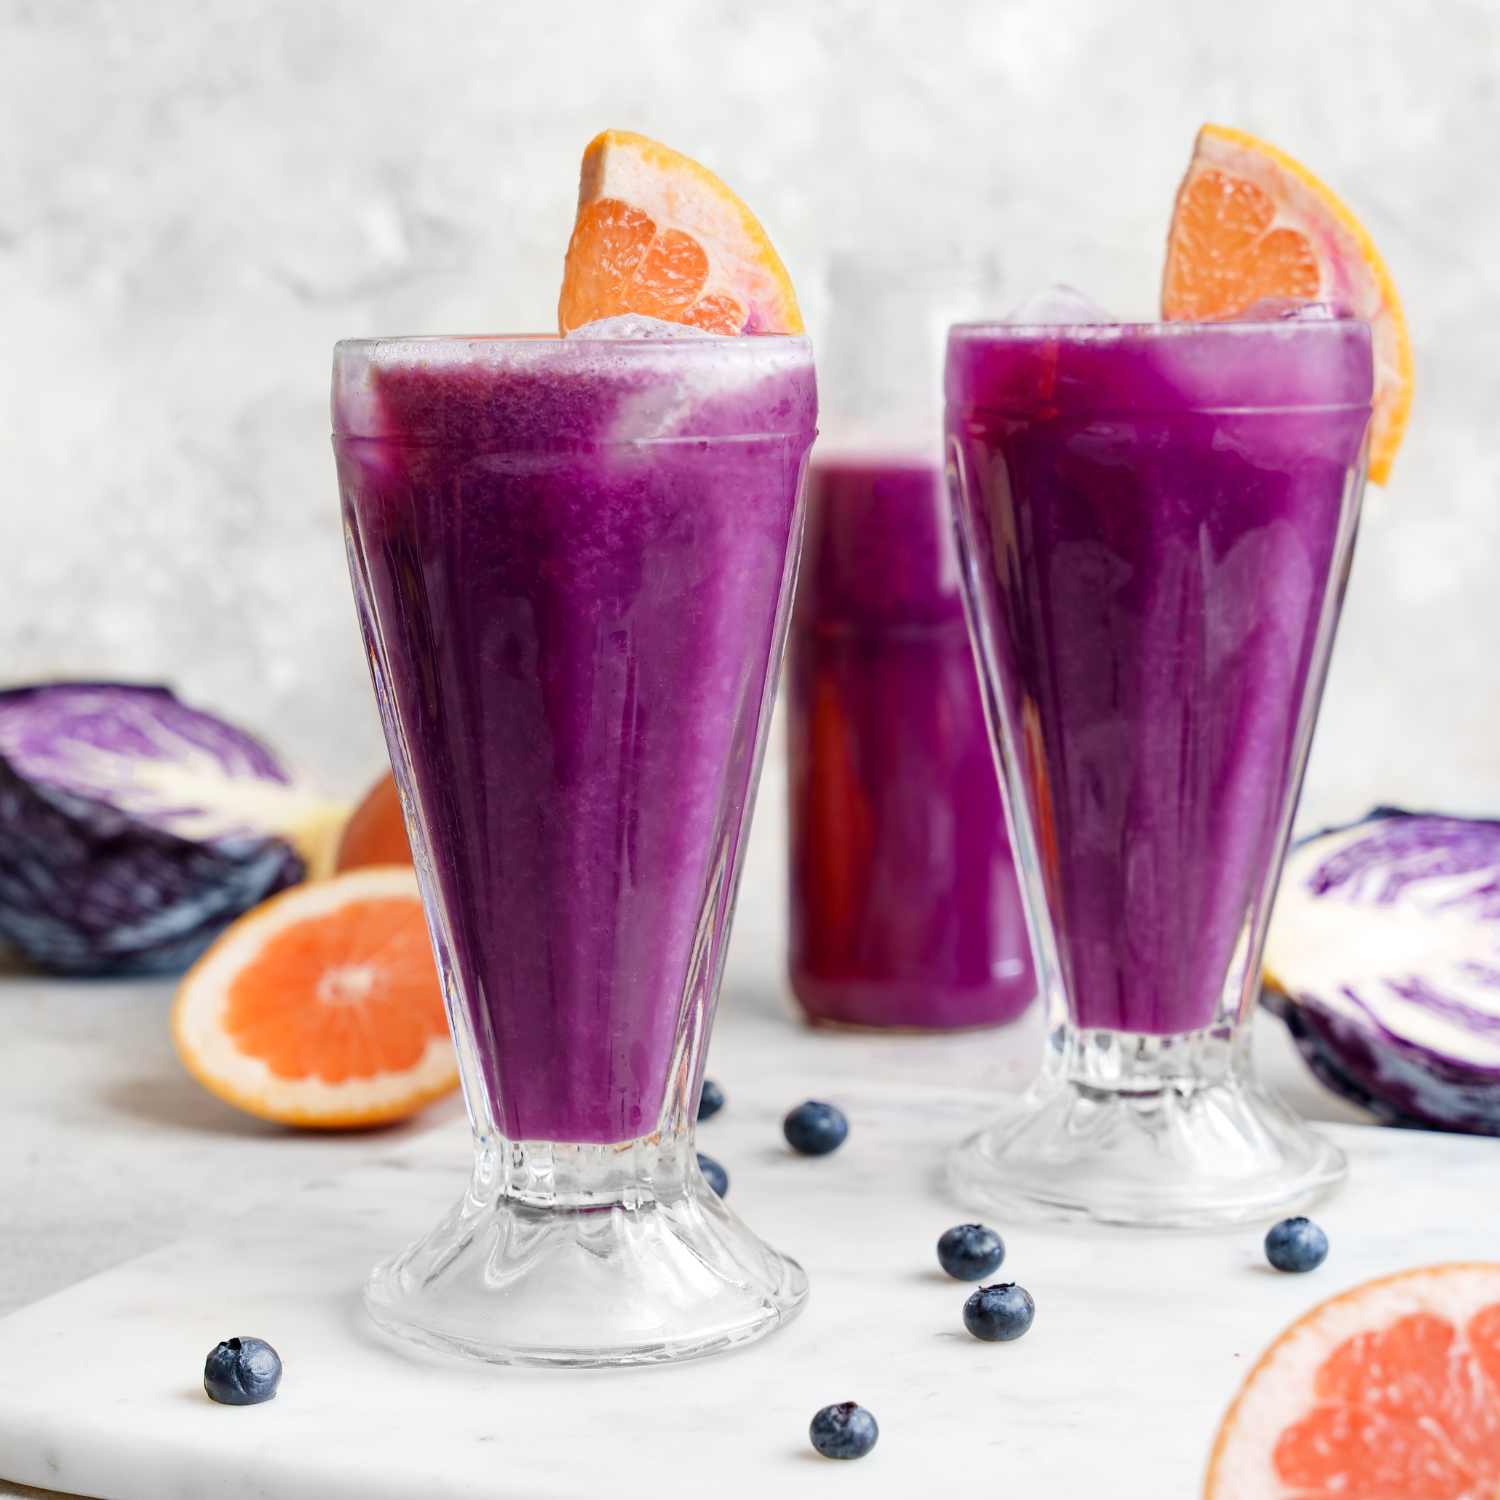 Two glasses of purple juice with a grapefruit wedge on each rim.